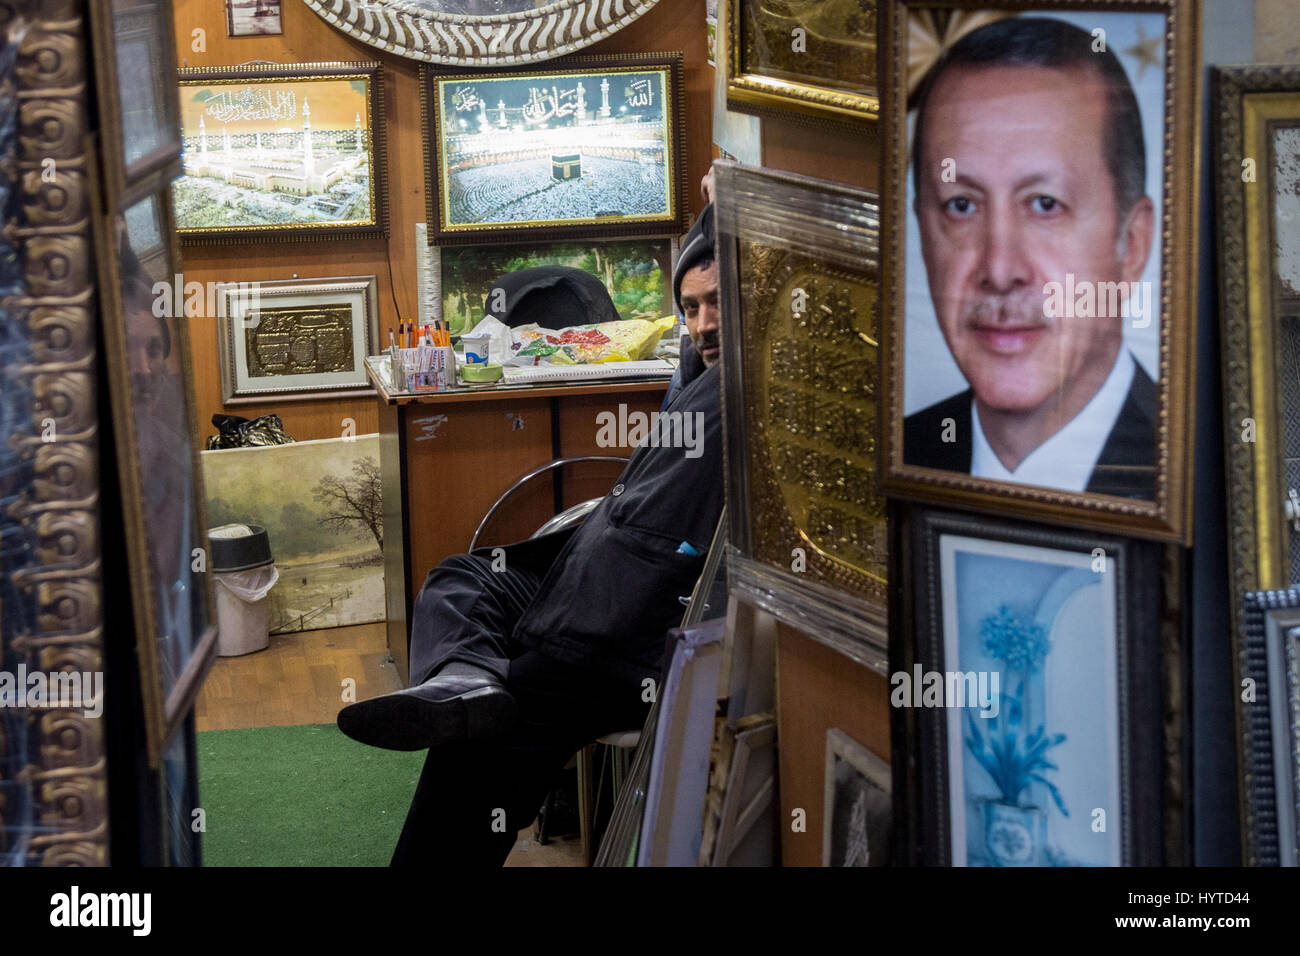 ISTANBUL, TURKEY - DECEMBER 29, 2015: Shopkeeper selling a huge portrait of the Turkish President, Recep Tayyip Erdogan  Picture of a salesman selling Stock Photo